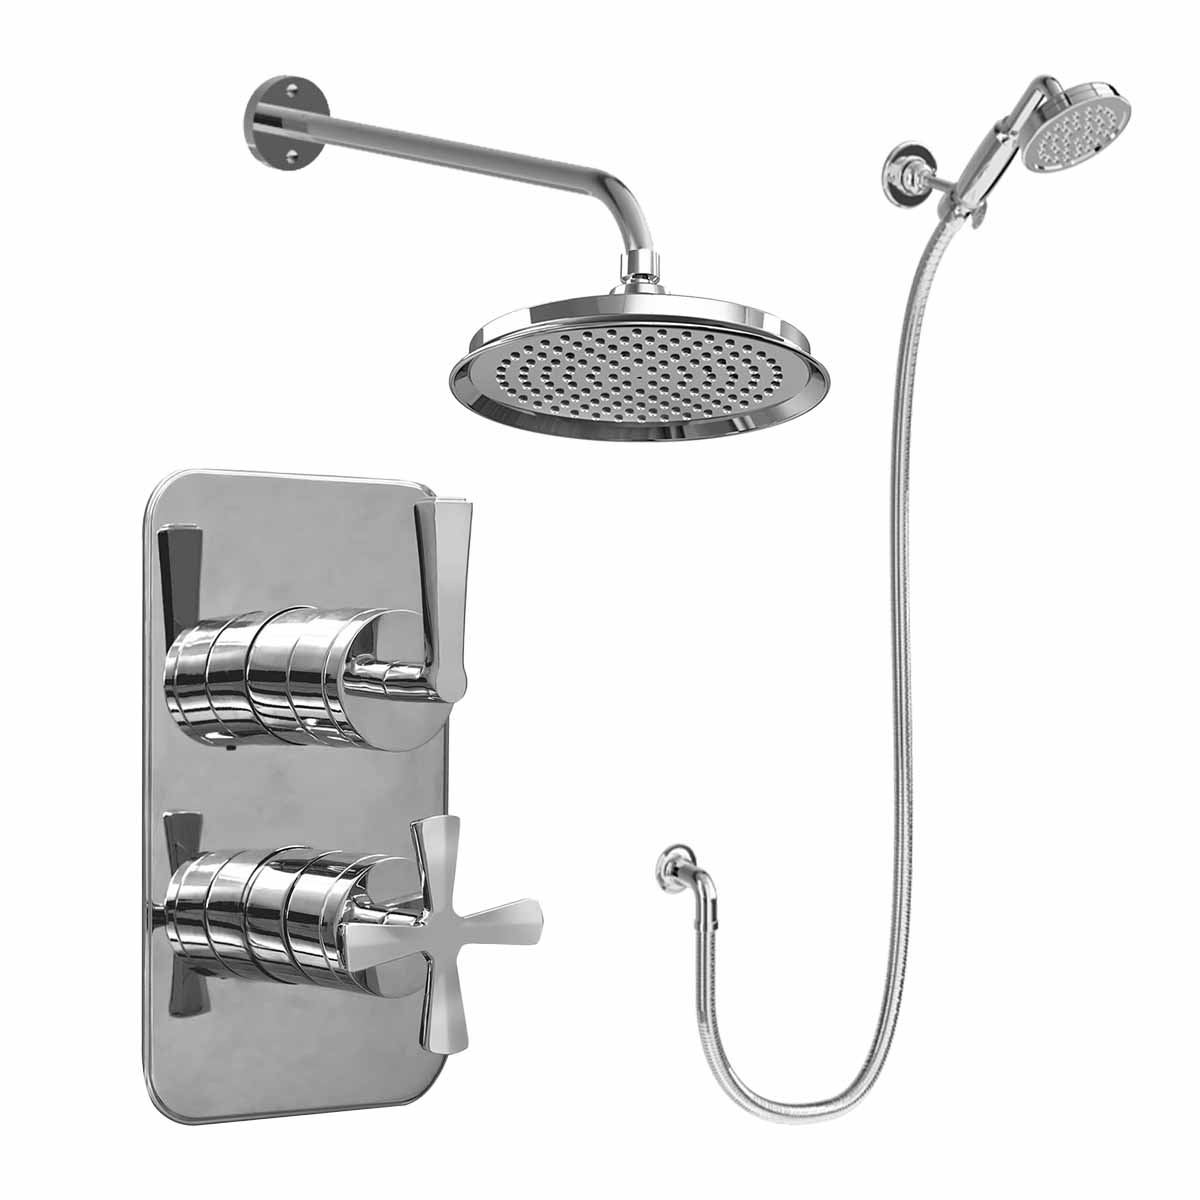 Burlington Riviera Shower Valve With Wall-Mounted Fixed Overhead and Handset Chrome Deluxe Bathrooms UK